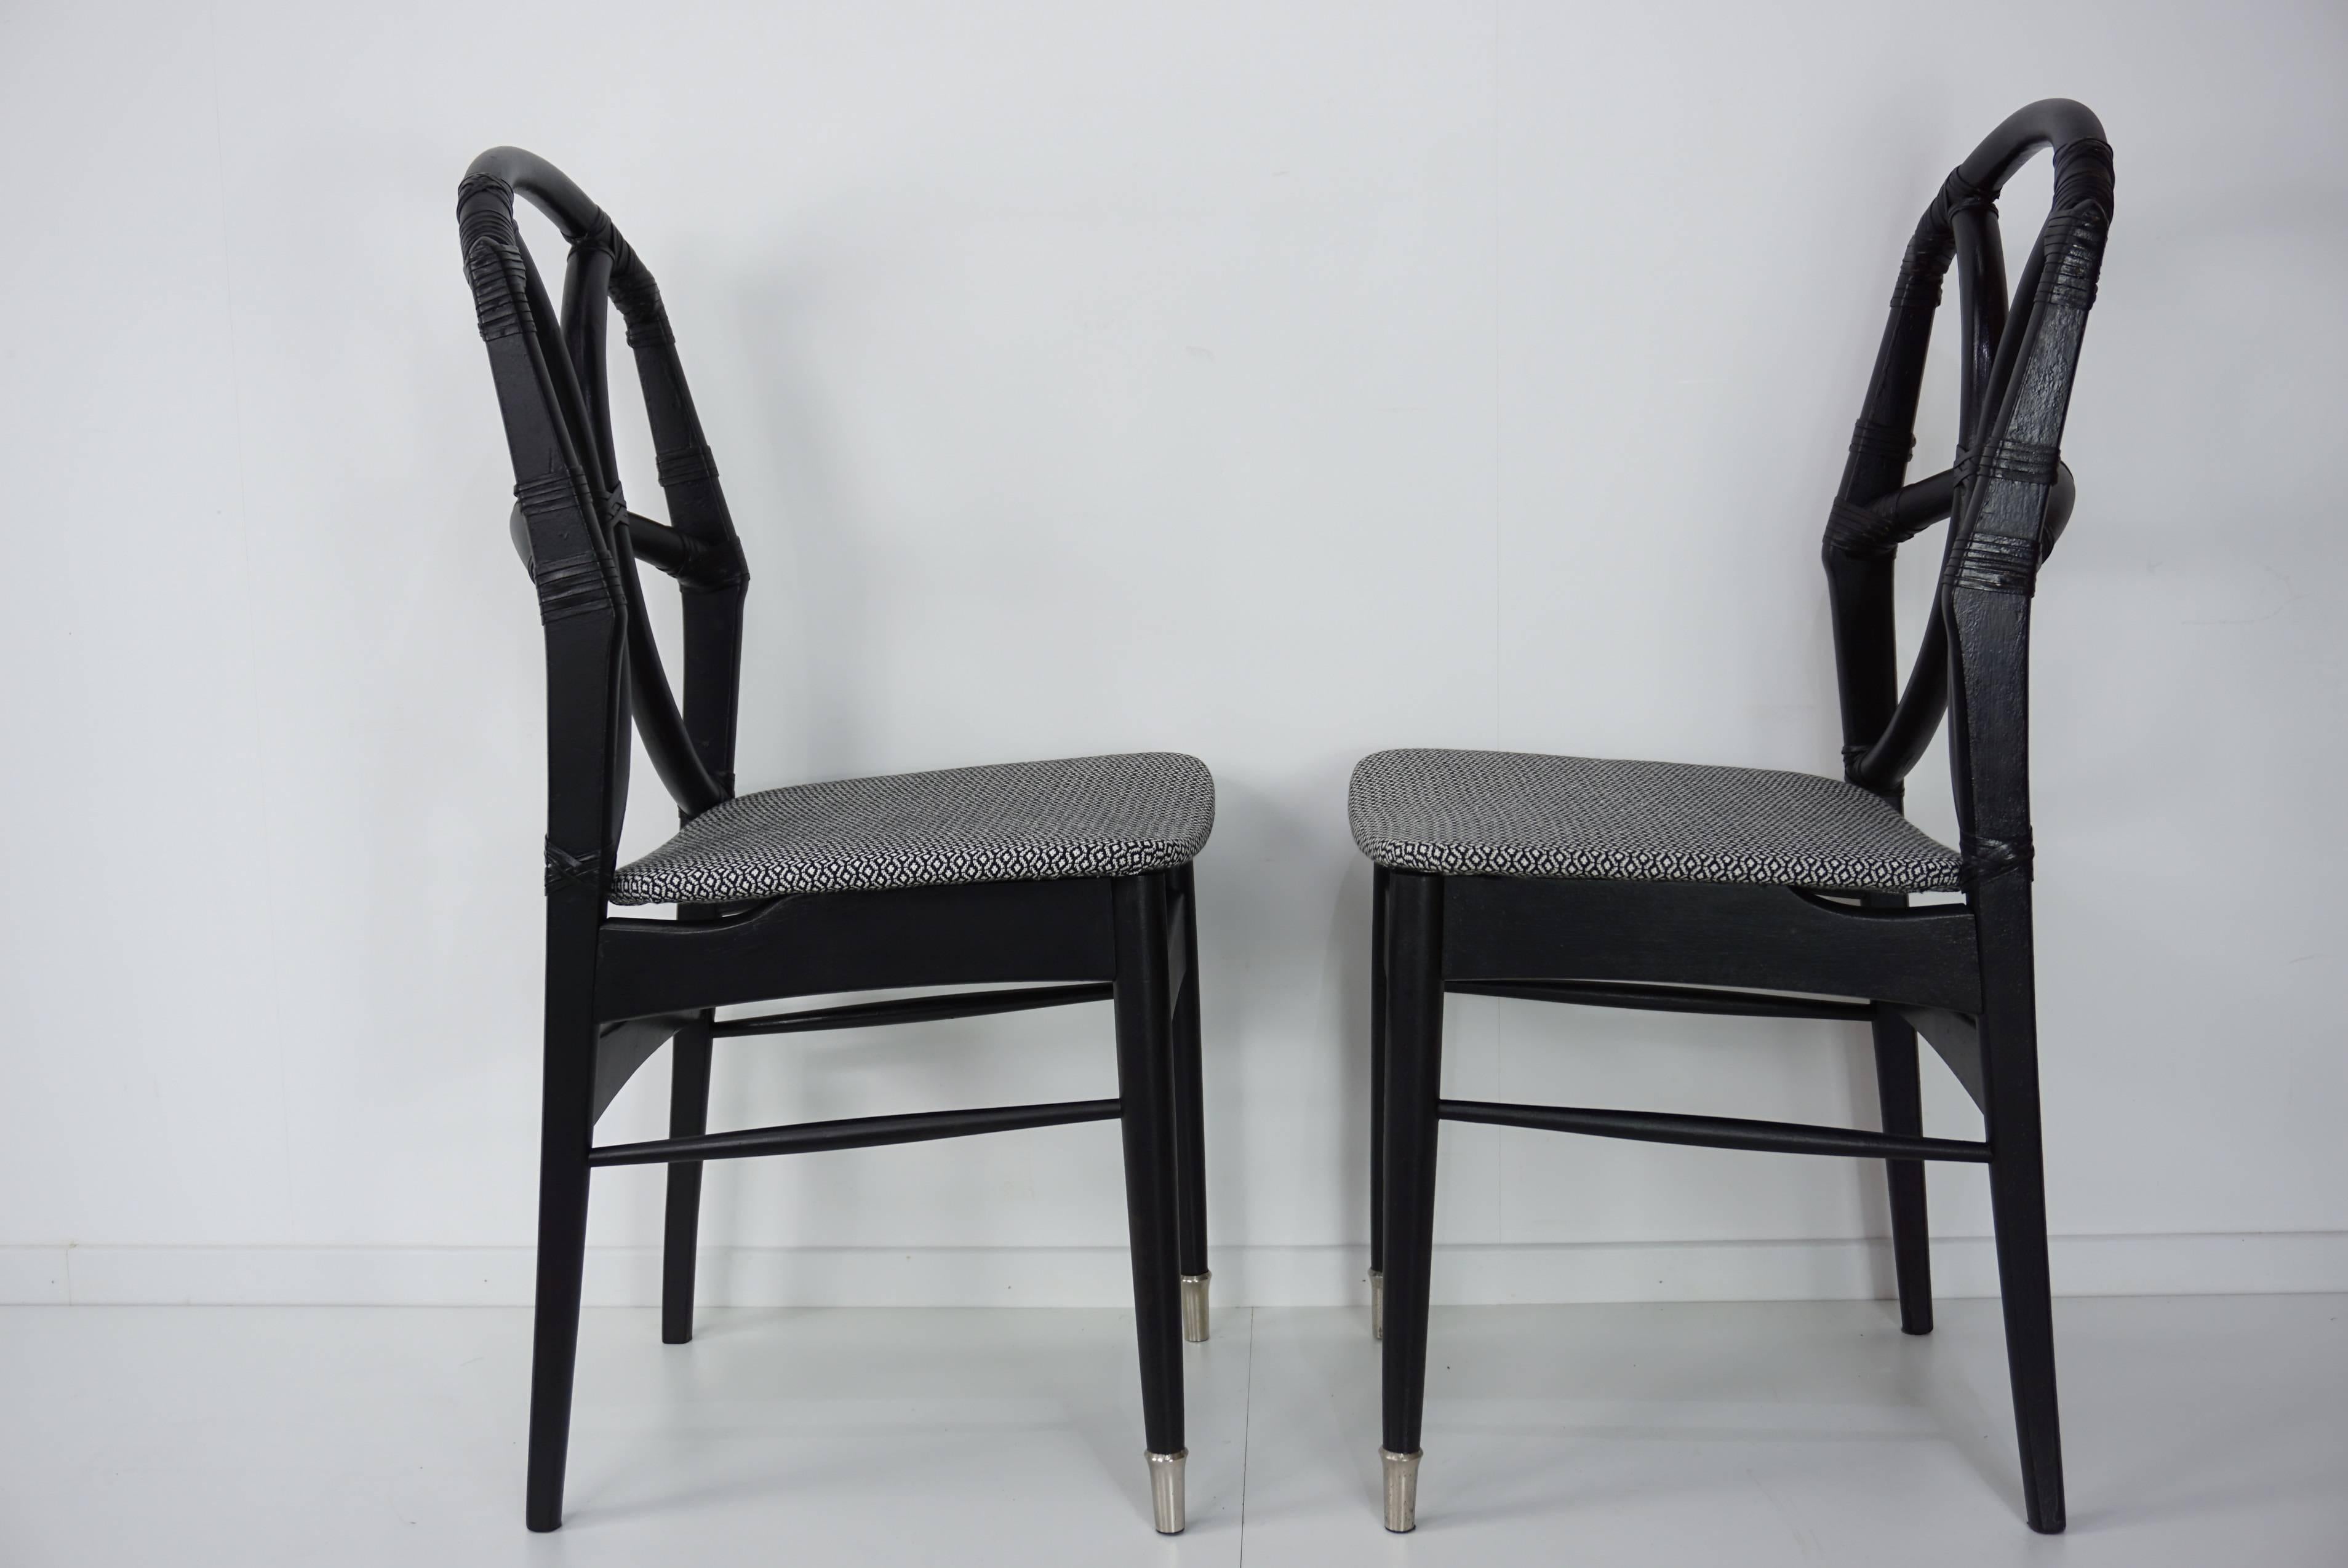 Elegant and amazing set of four black wooden structure with leather and rattan backrest, black and white fabric chairs design from the 1950s.